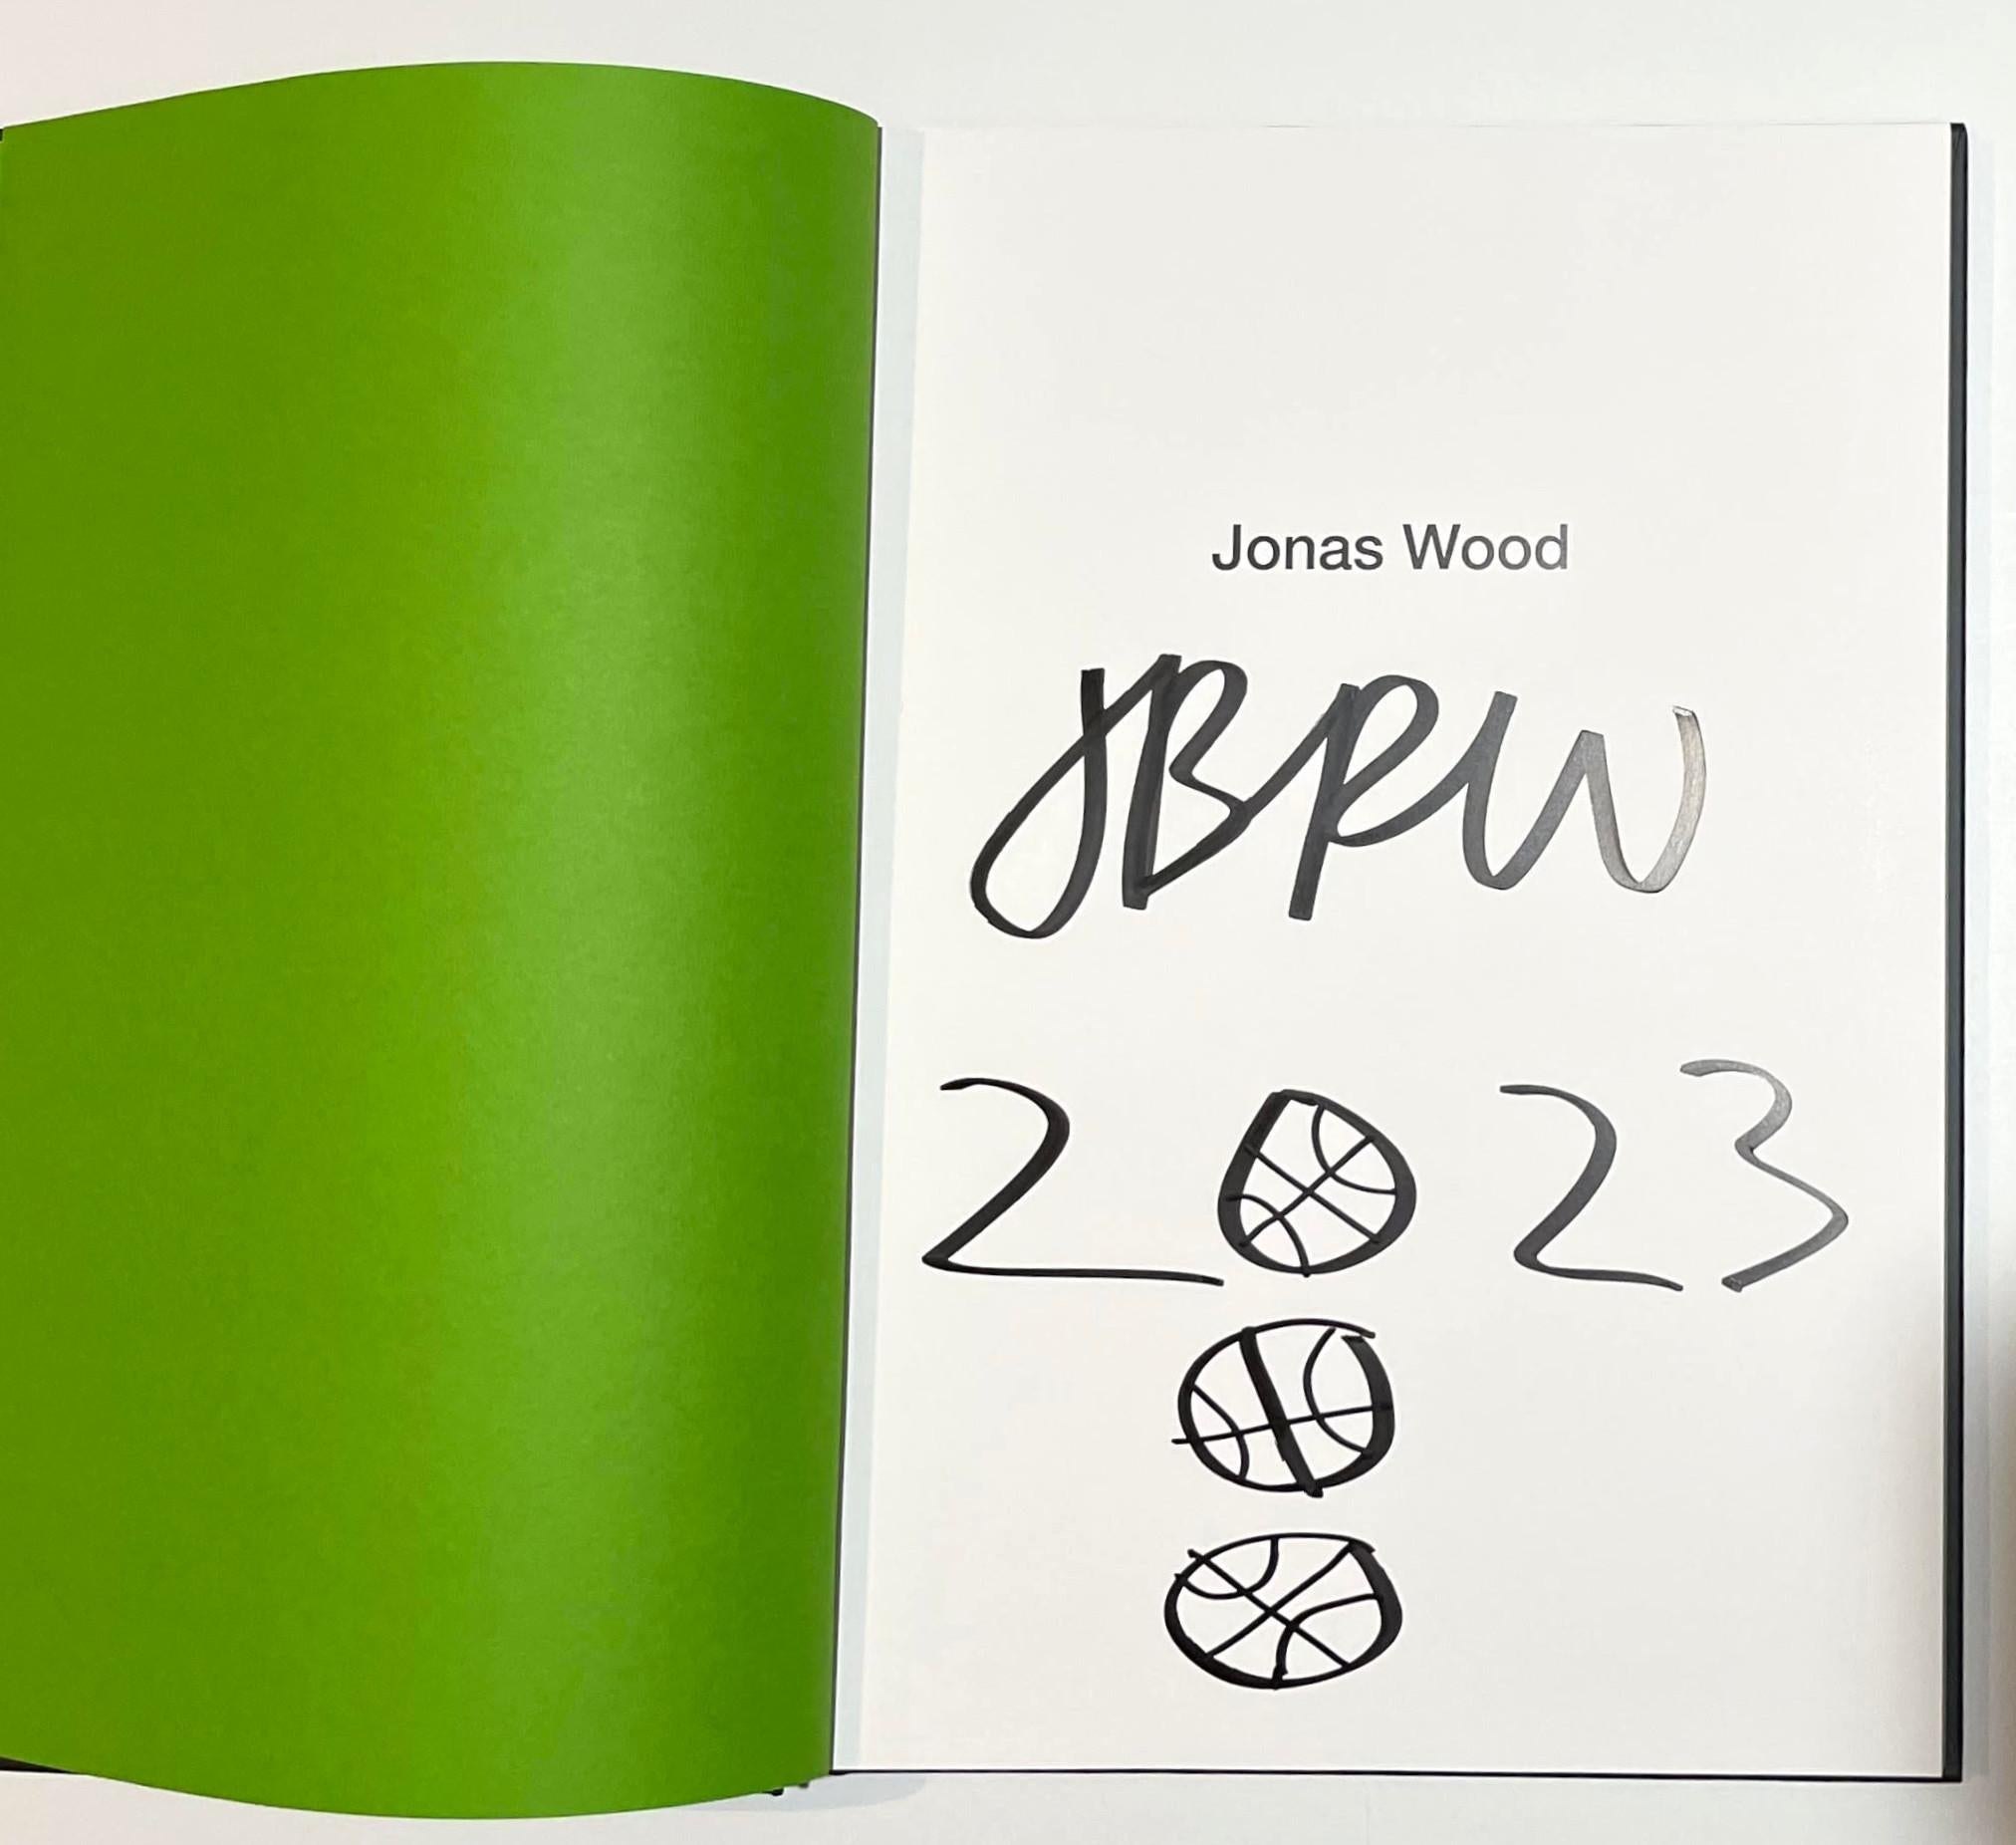 Jonas Wood 24 Tennis Court Drawings book (hand signed with hand drawn tennis balls), 2021
Hardback monograph with signed and dated tennis ball drawing
Signed and dated with 3 balls drawing by Jonas Wood
13 1/2 × 9 1/4 × 2/5 inches
Unframed
Makes a